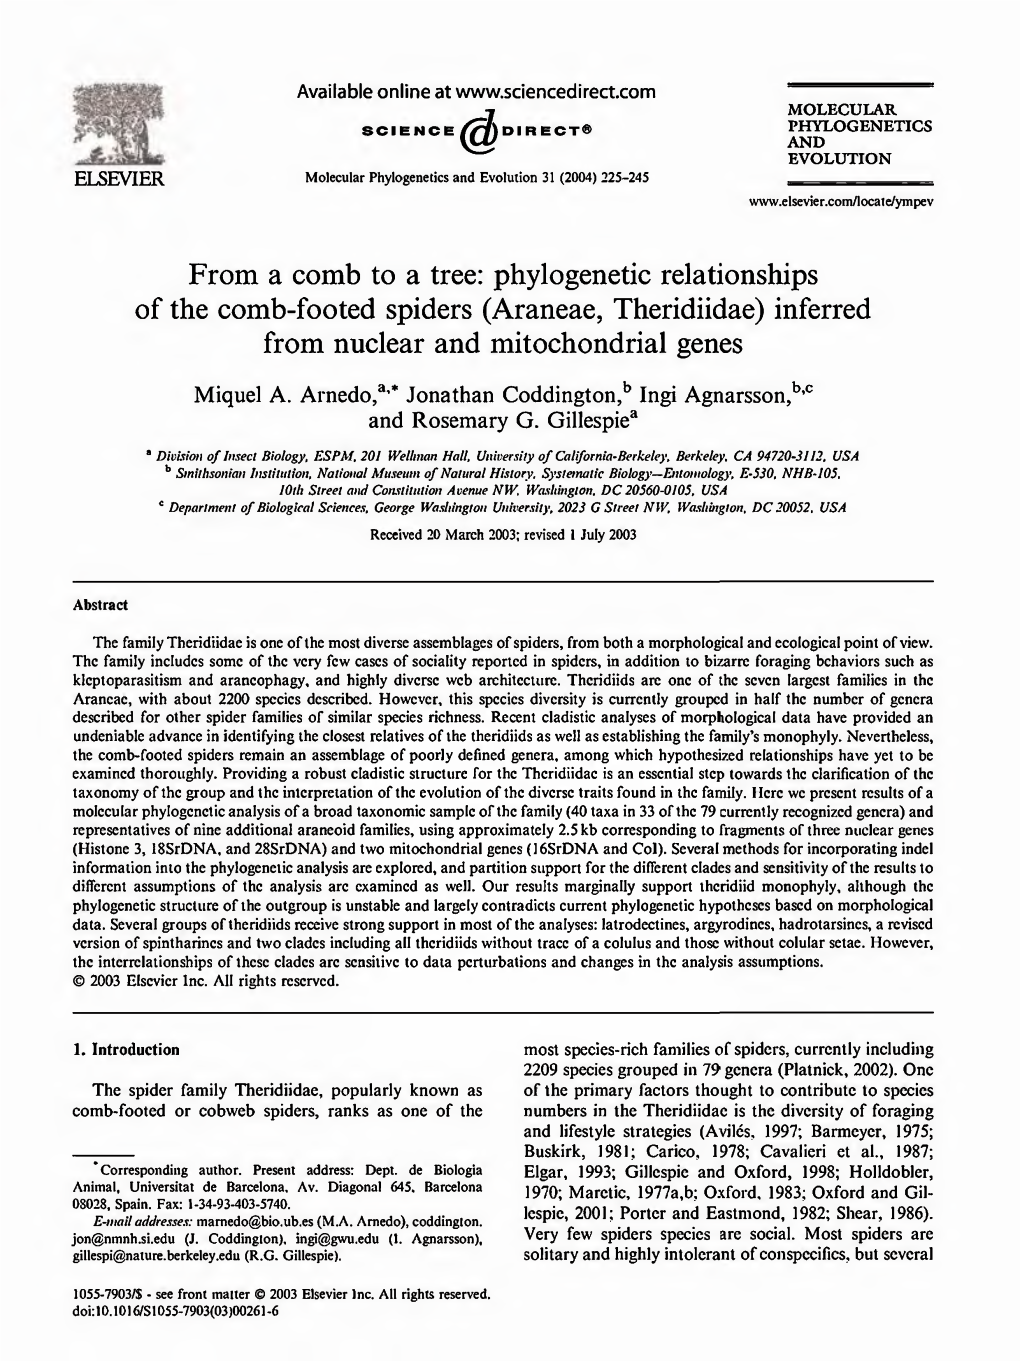 Phylogenetic Relationships of the Comb-Footed Spiders (Araneae, Theridiidae) Inferred from Nuclear and Mitochondrial Genes Miquel A